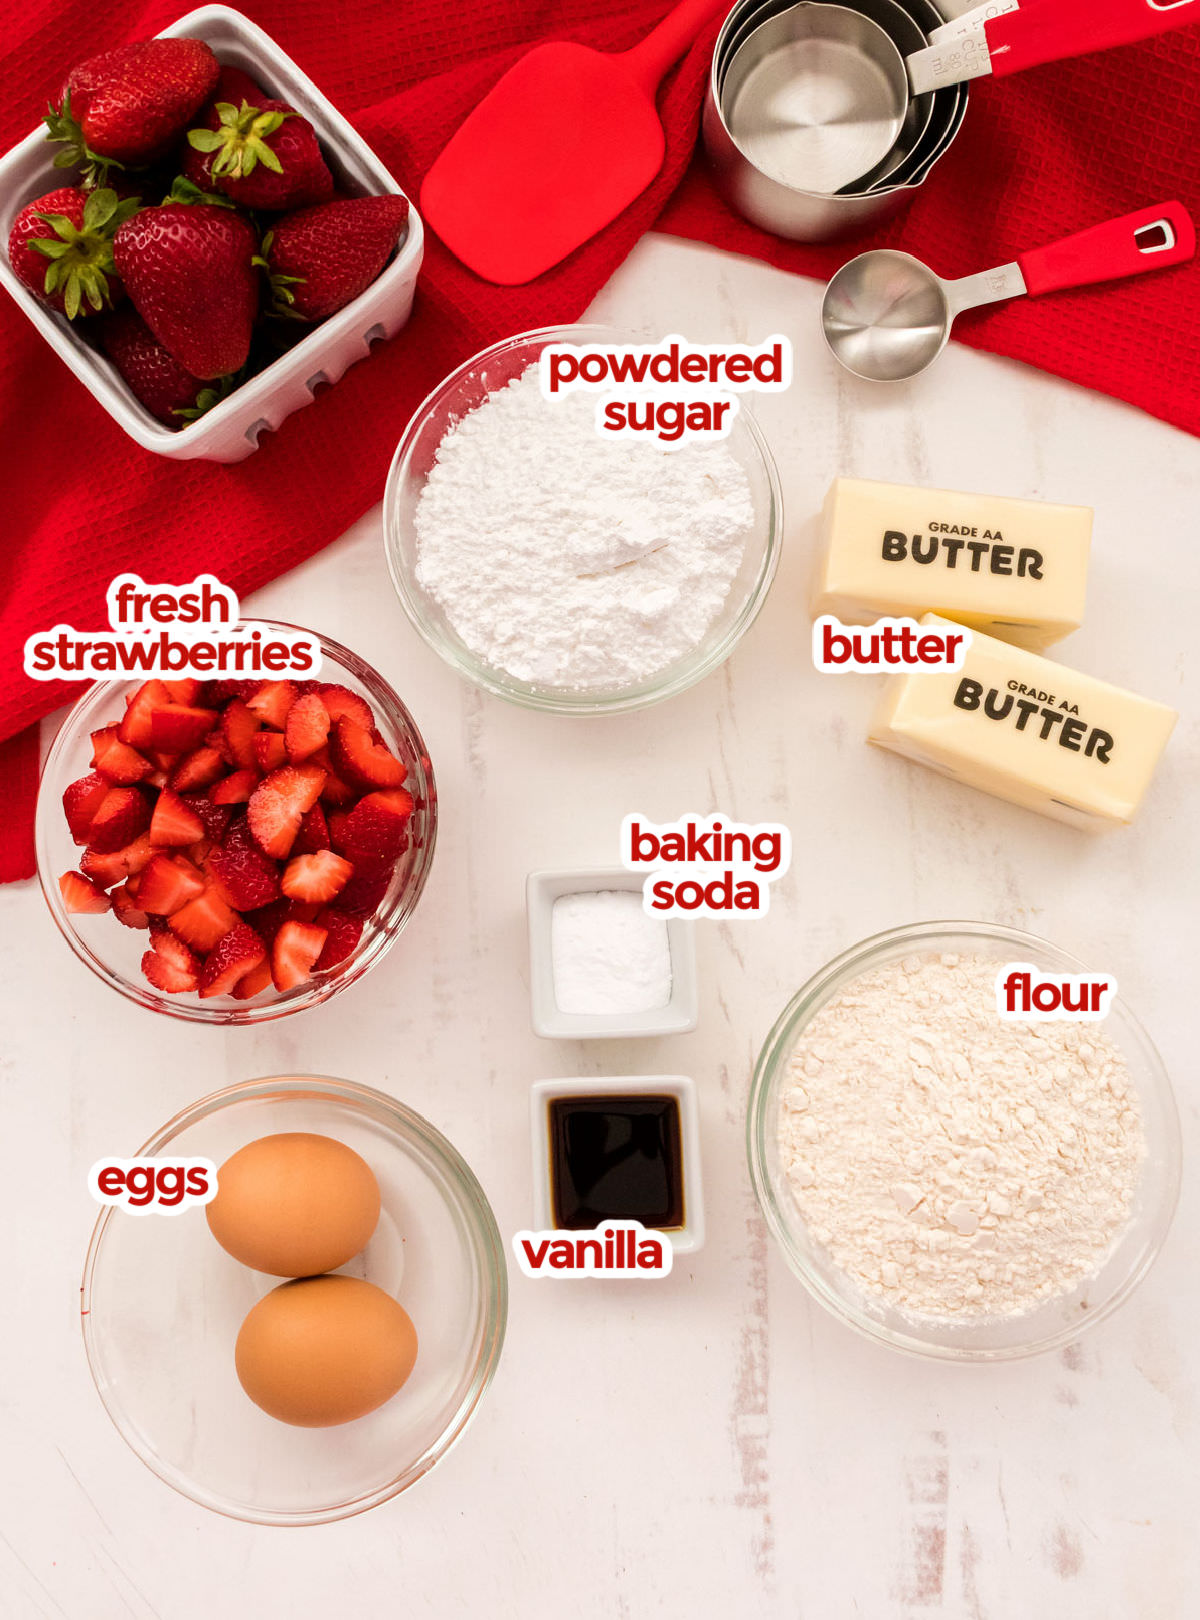 All the ingredients you will need to make Strawberry Shortcake Cookies including butter, powdered sugar, eggs, vanilla, flour, baking soda and fresh strawberries.